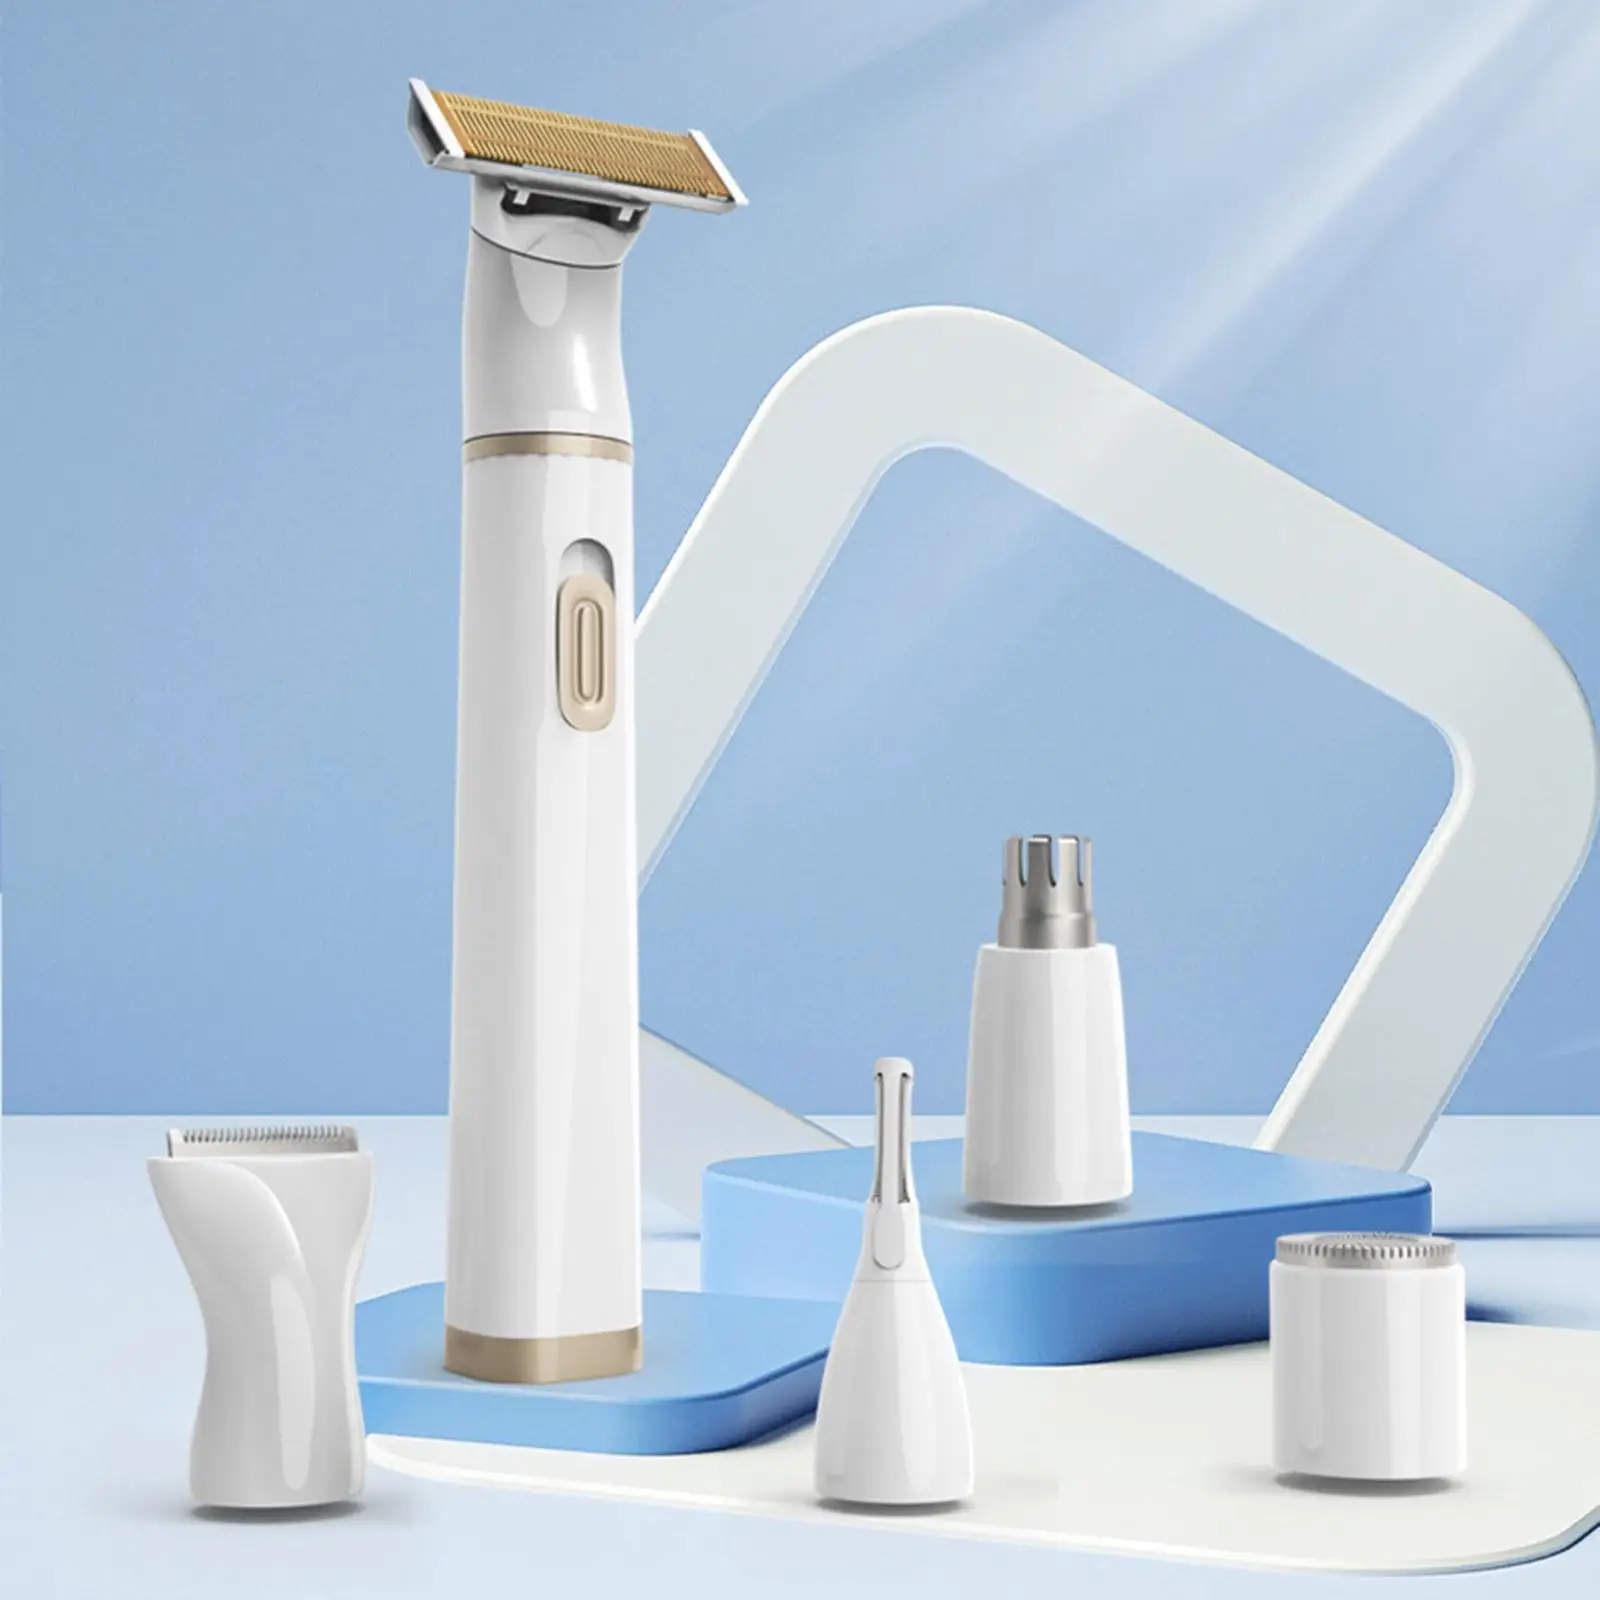 USB Charging Bikini Trimmer Wet Dry Operation Painless Electric Hair Removal Device Body Shaver for Pubic Hair Legs Underarms